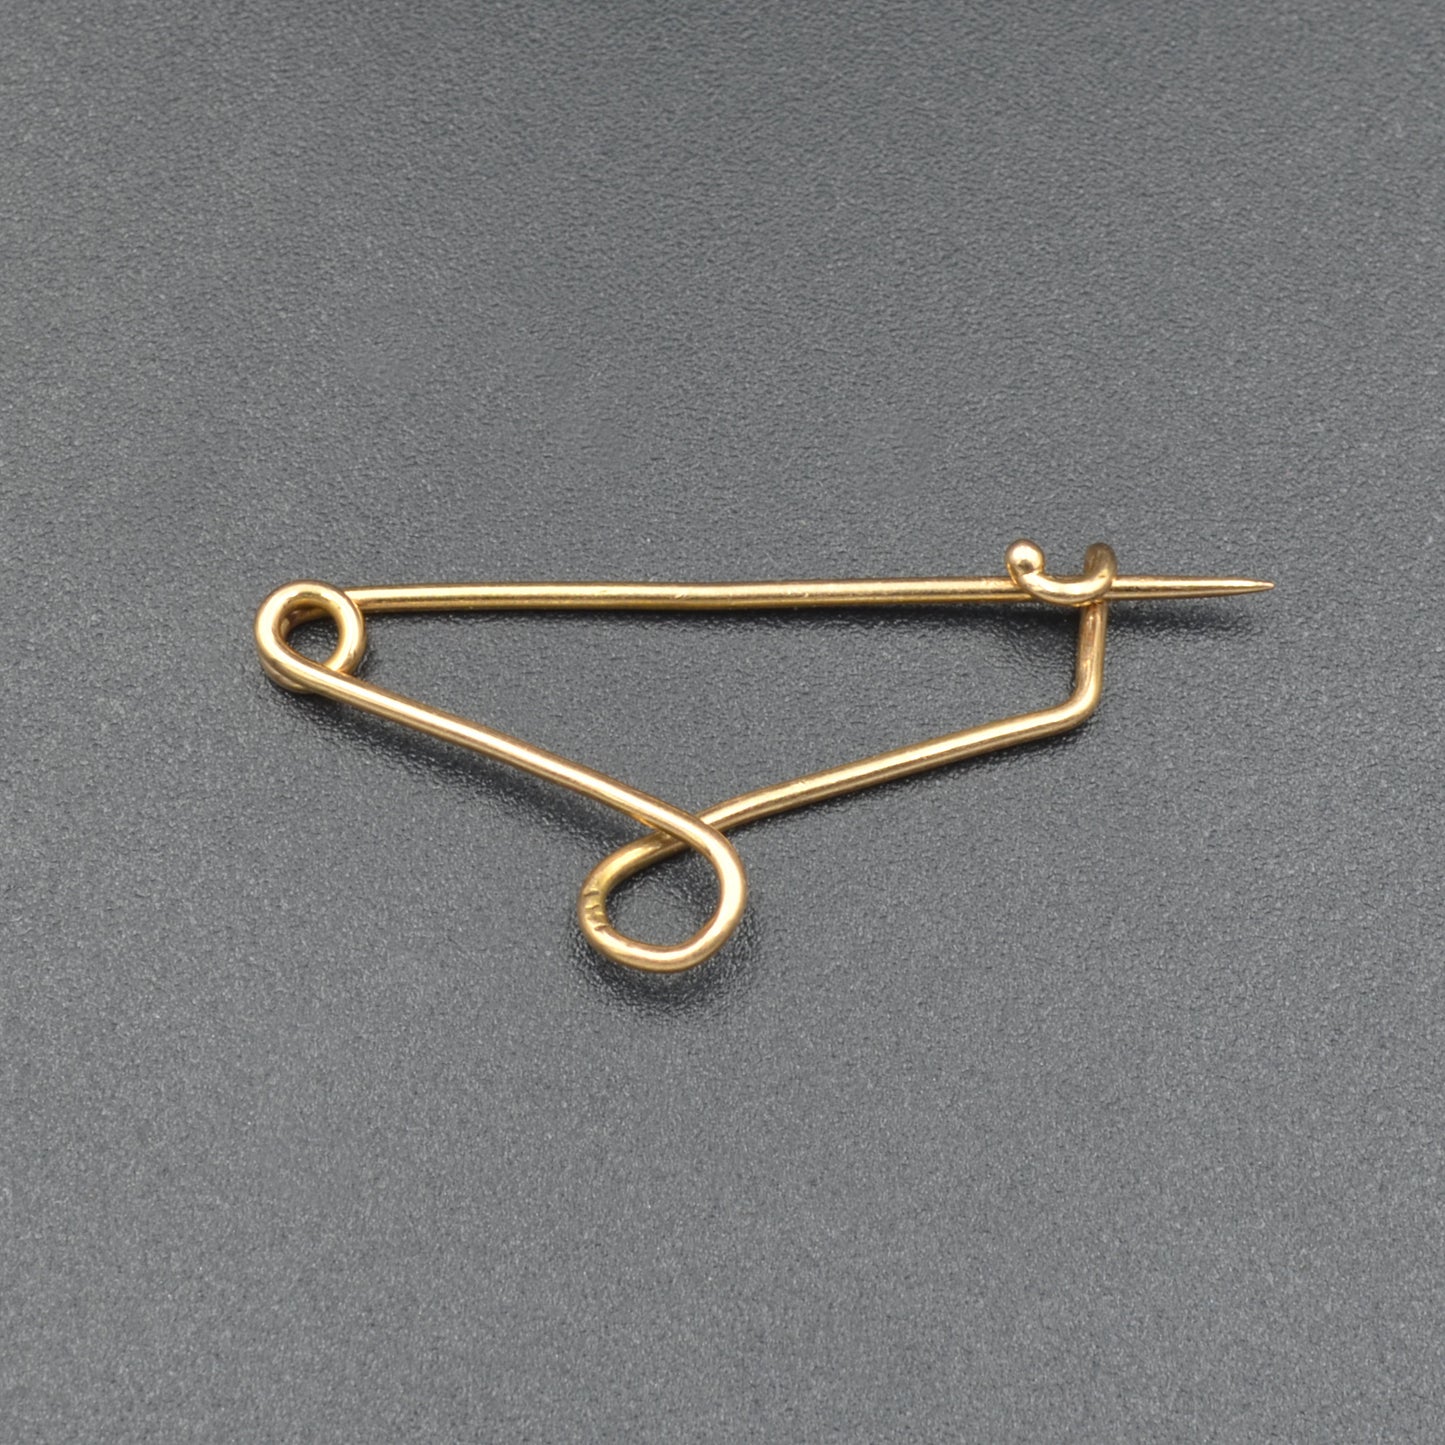 Vintage 18k Gold Wire Safety Pin